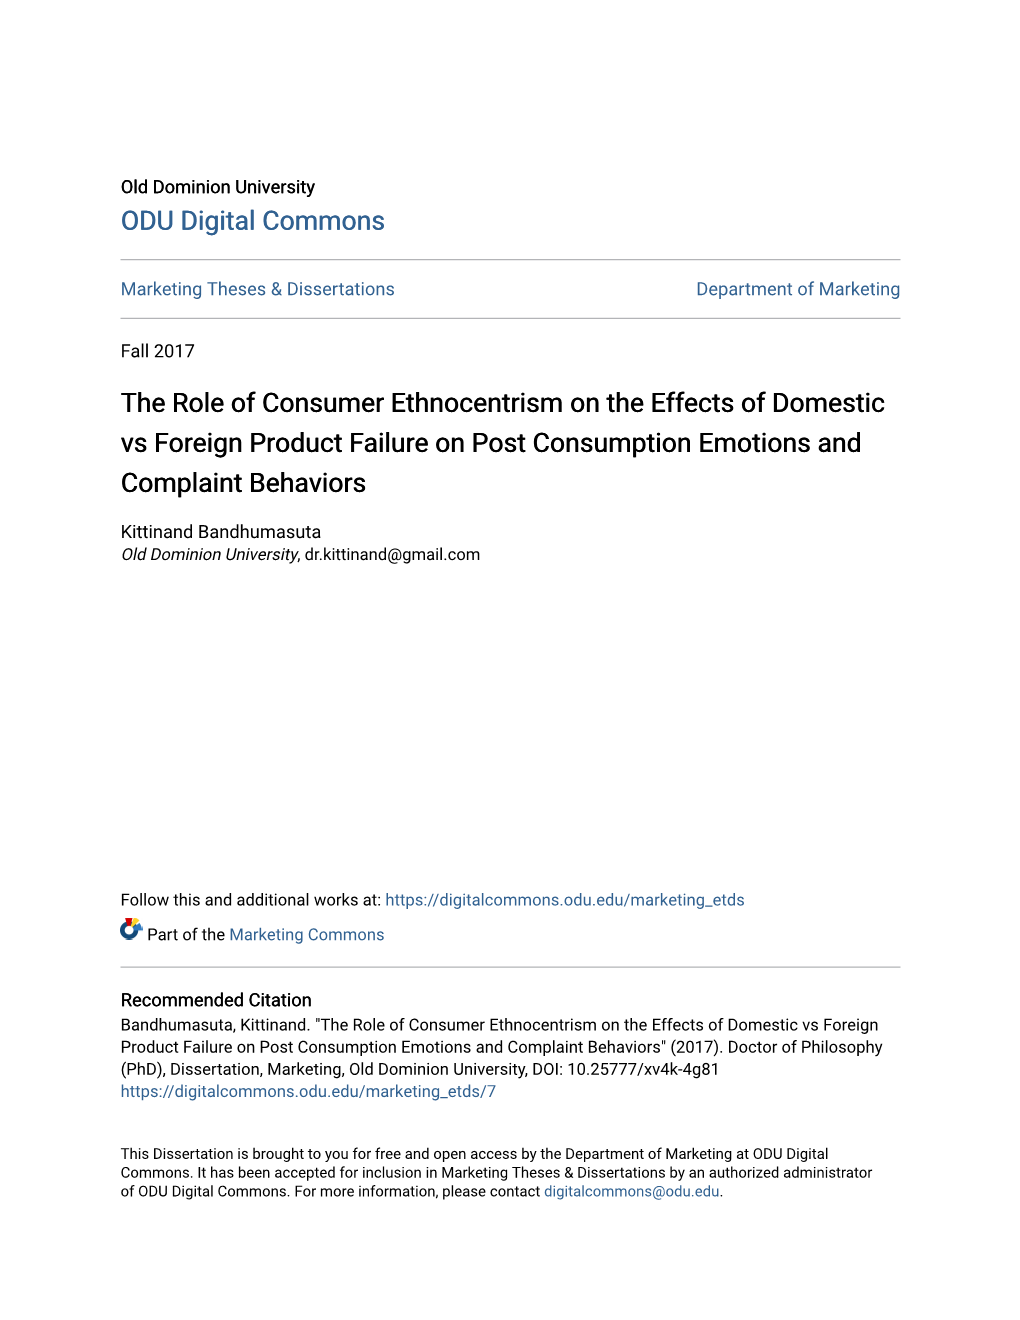 The Role of Consumer Ethnocentrism on the Effects of Domestic Vs Foreign Product Failure on Post Consumption Emotions and Complaint Behaviors